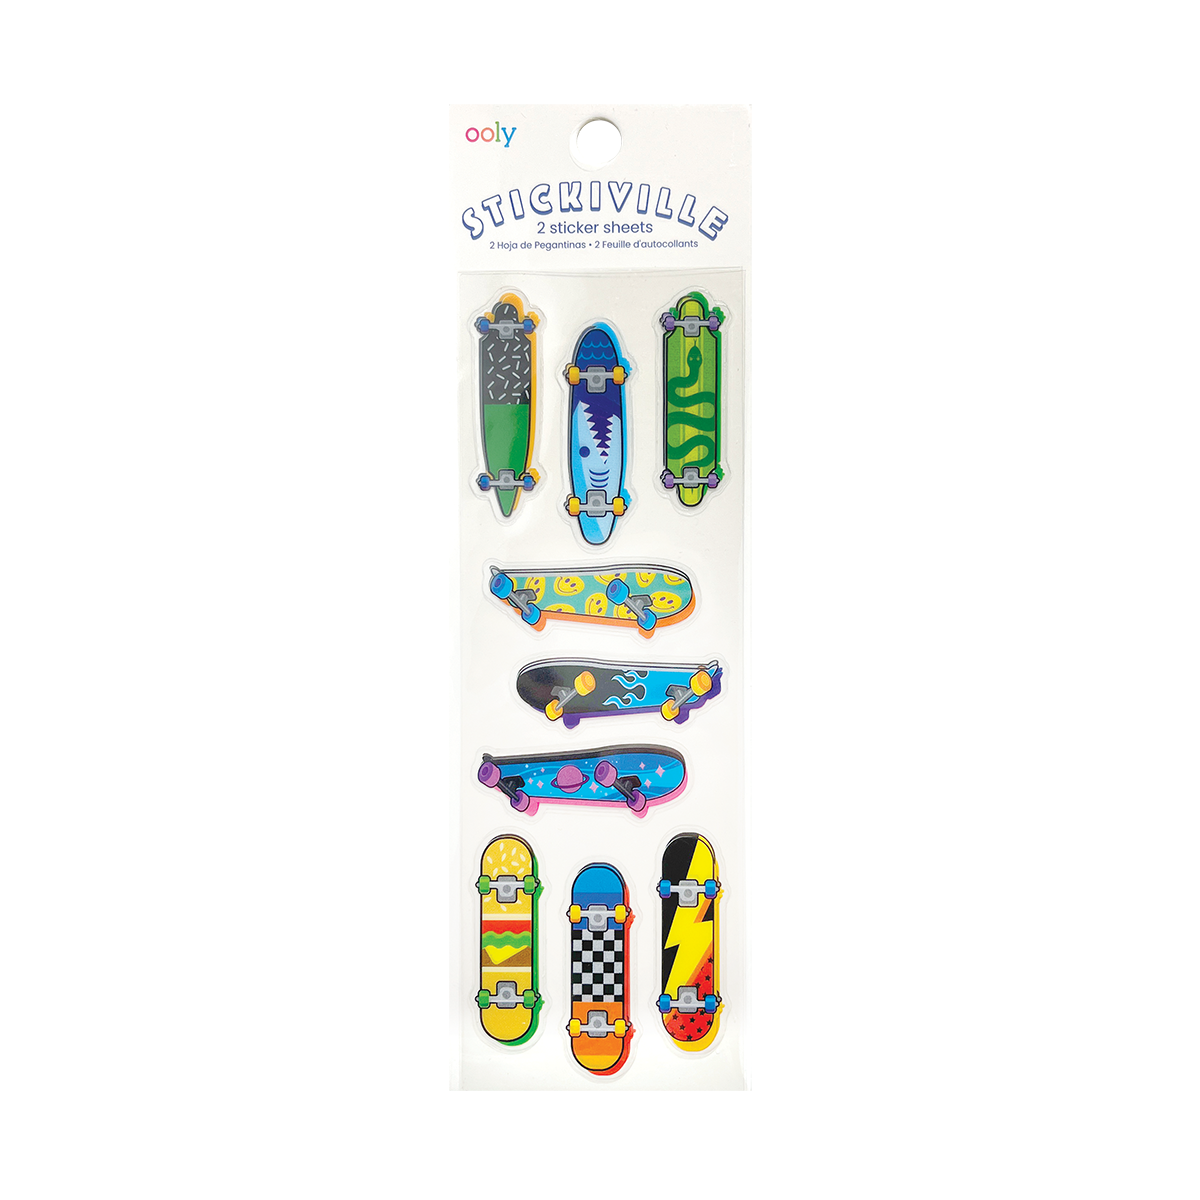 OOLY Stickiville Skateboards Stickers in packaging